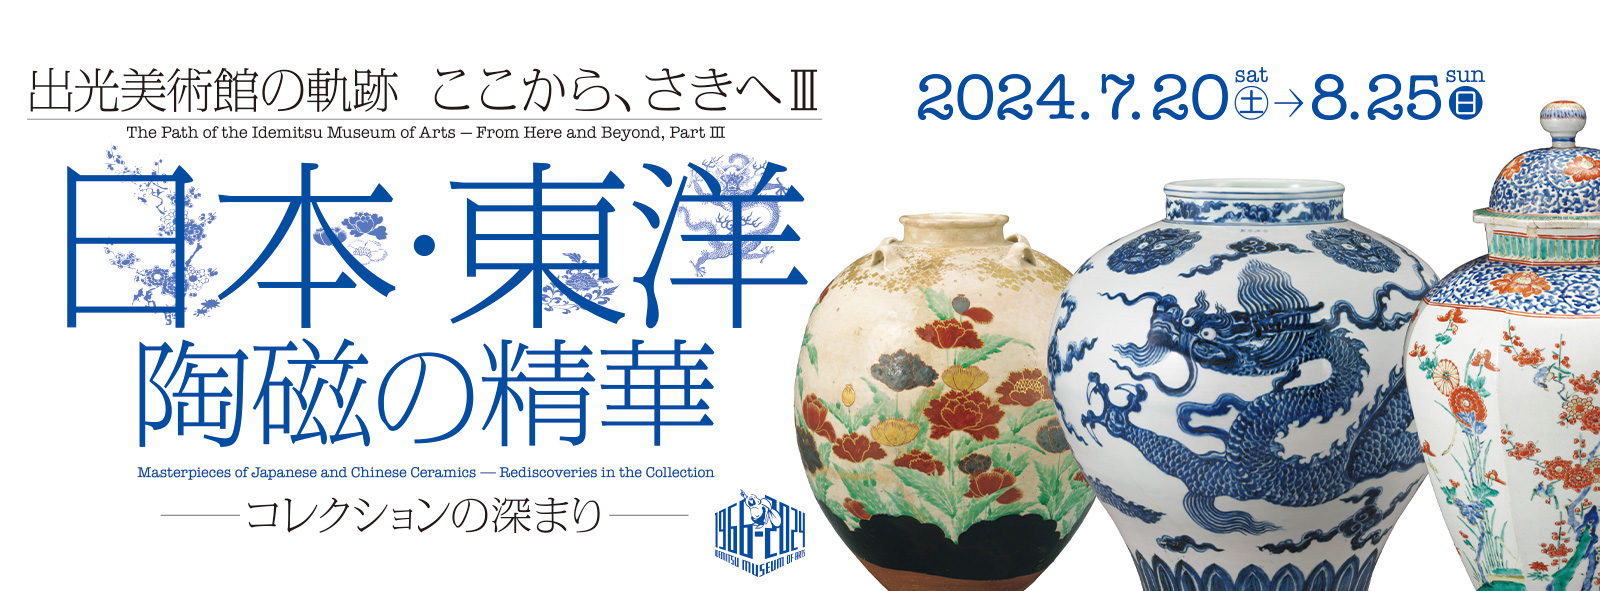 Masterpieces of Japanese and Chinese Ceramics